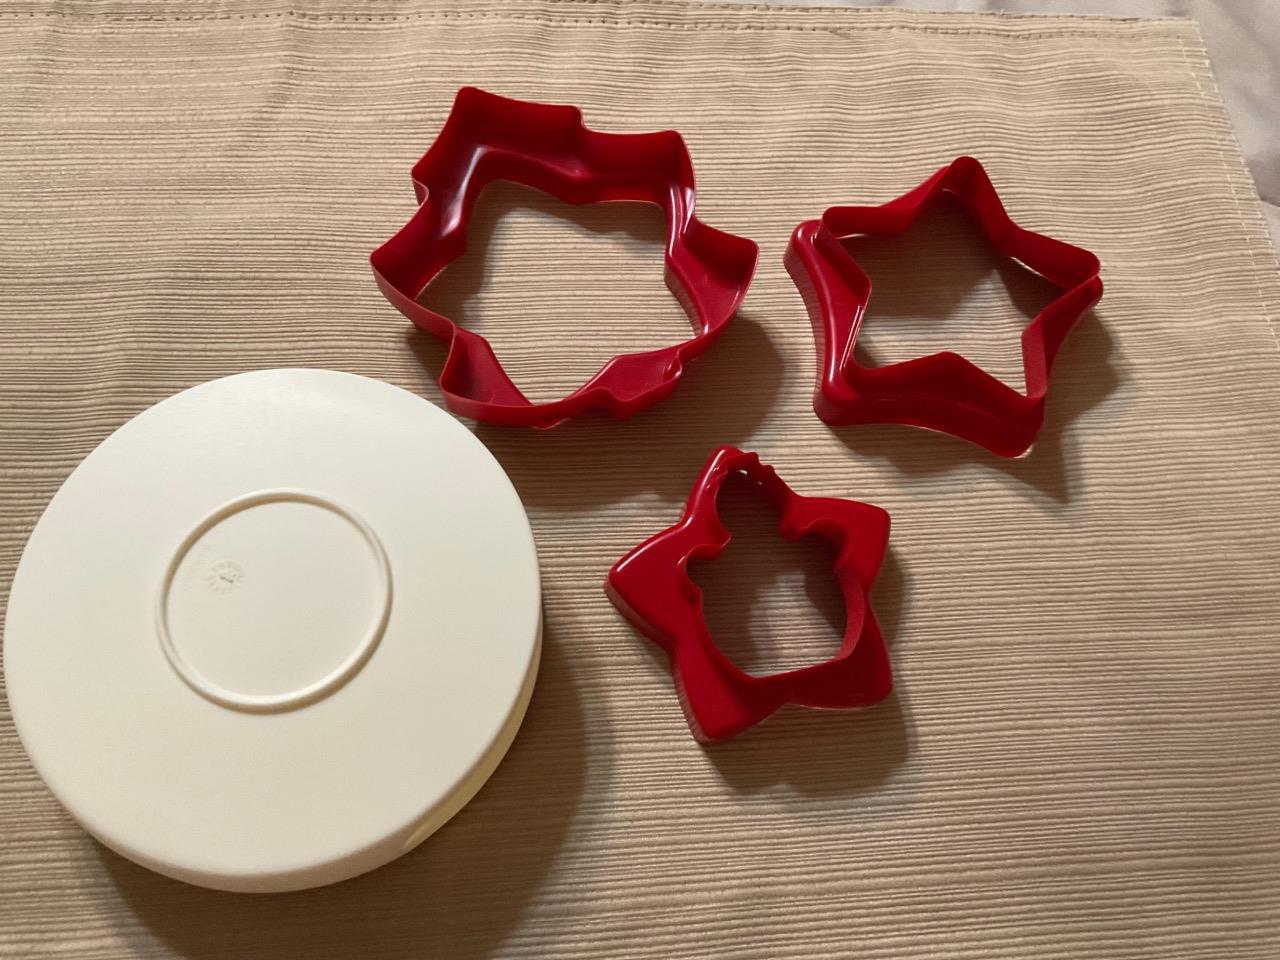 NWOP TUPPERWARE REVERSIBLE NESTING HOLIDAY COOKIE CUTTER SET W/STORAGE CONTAINER - $8.90